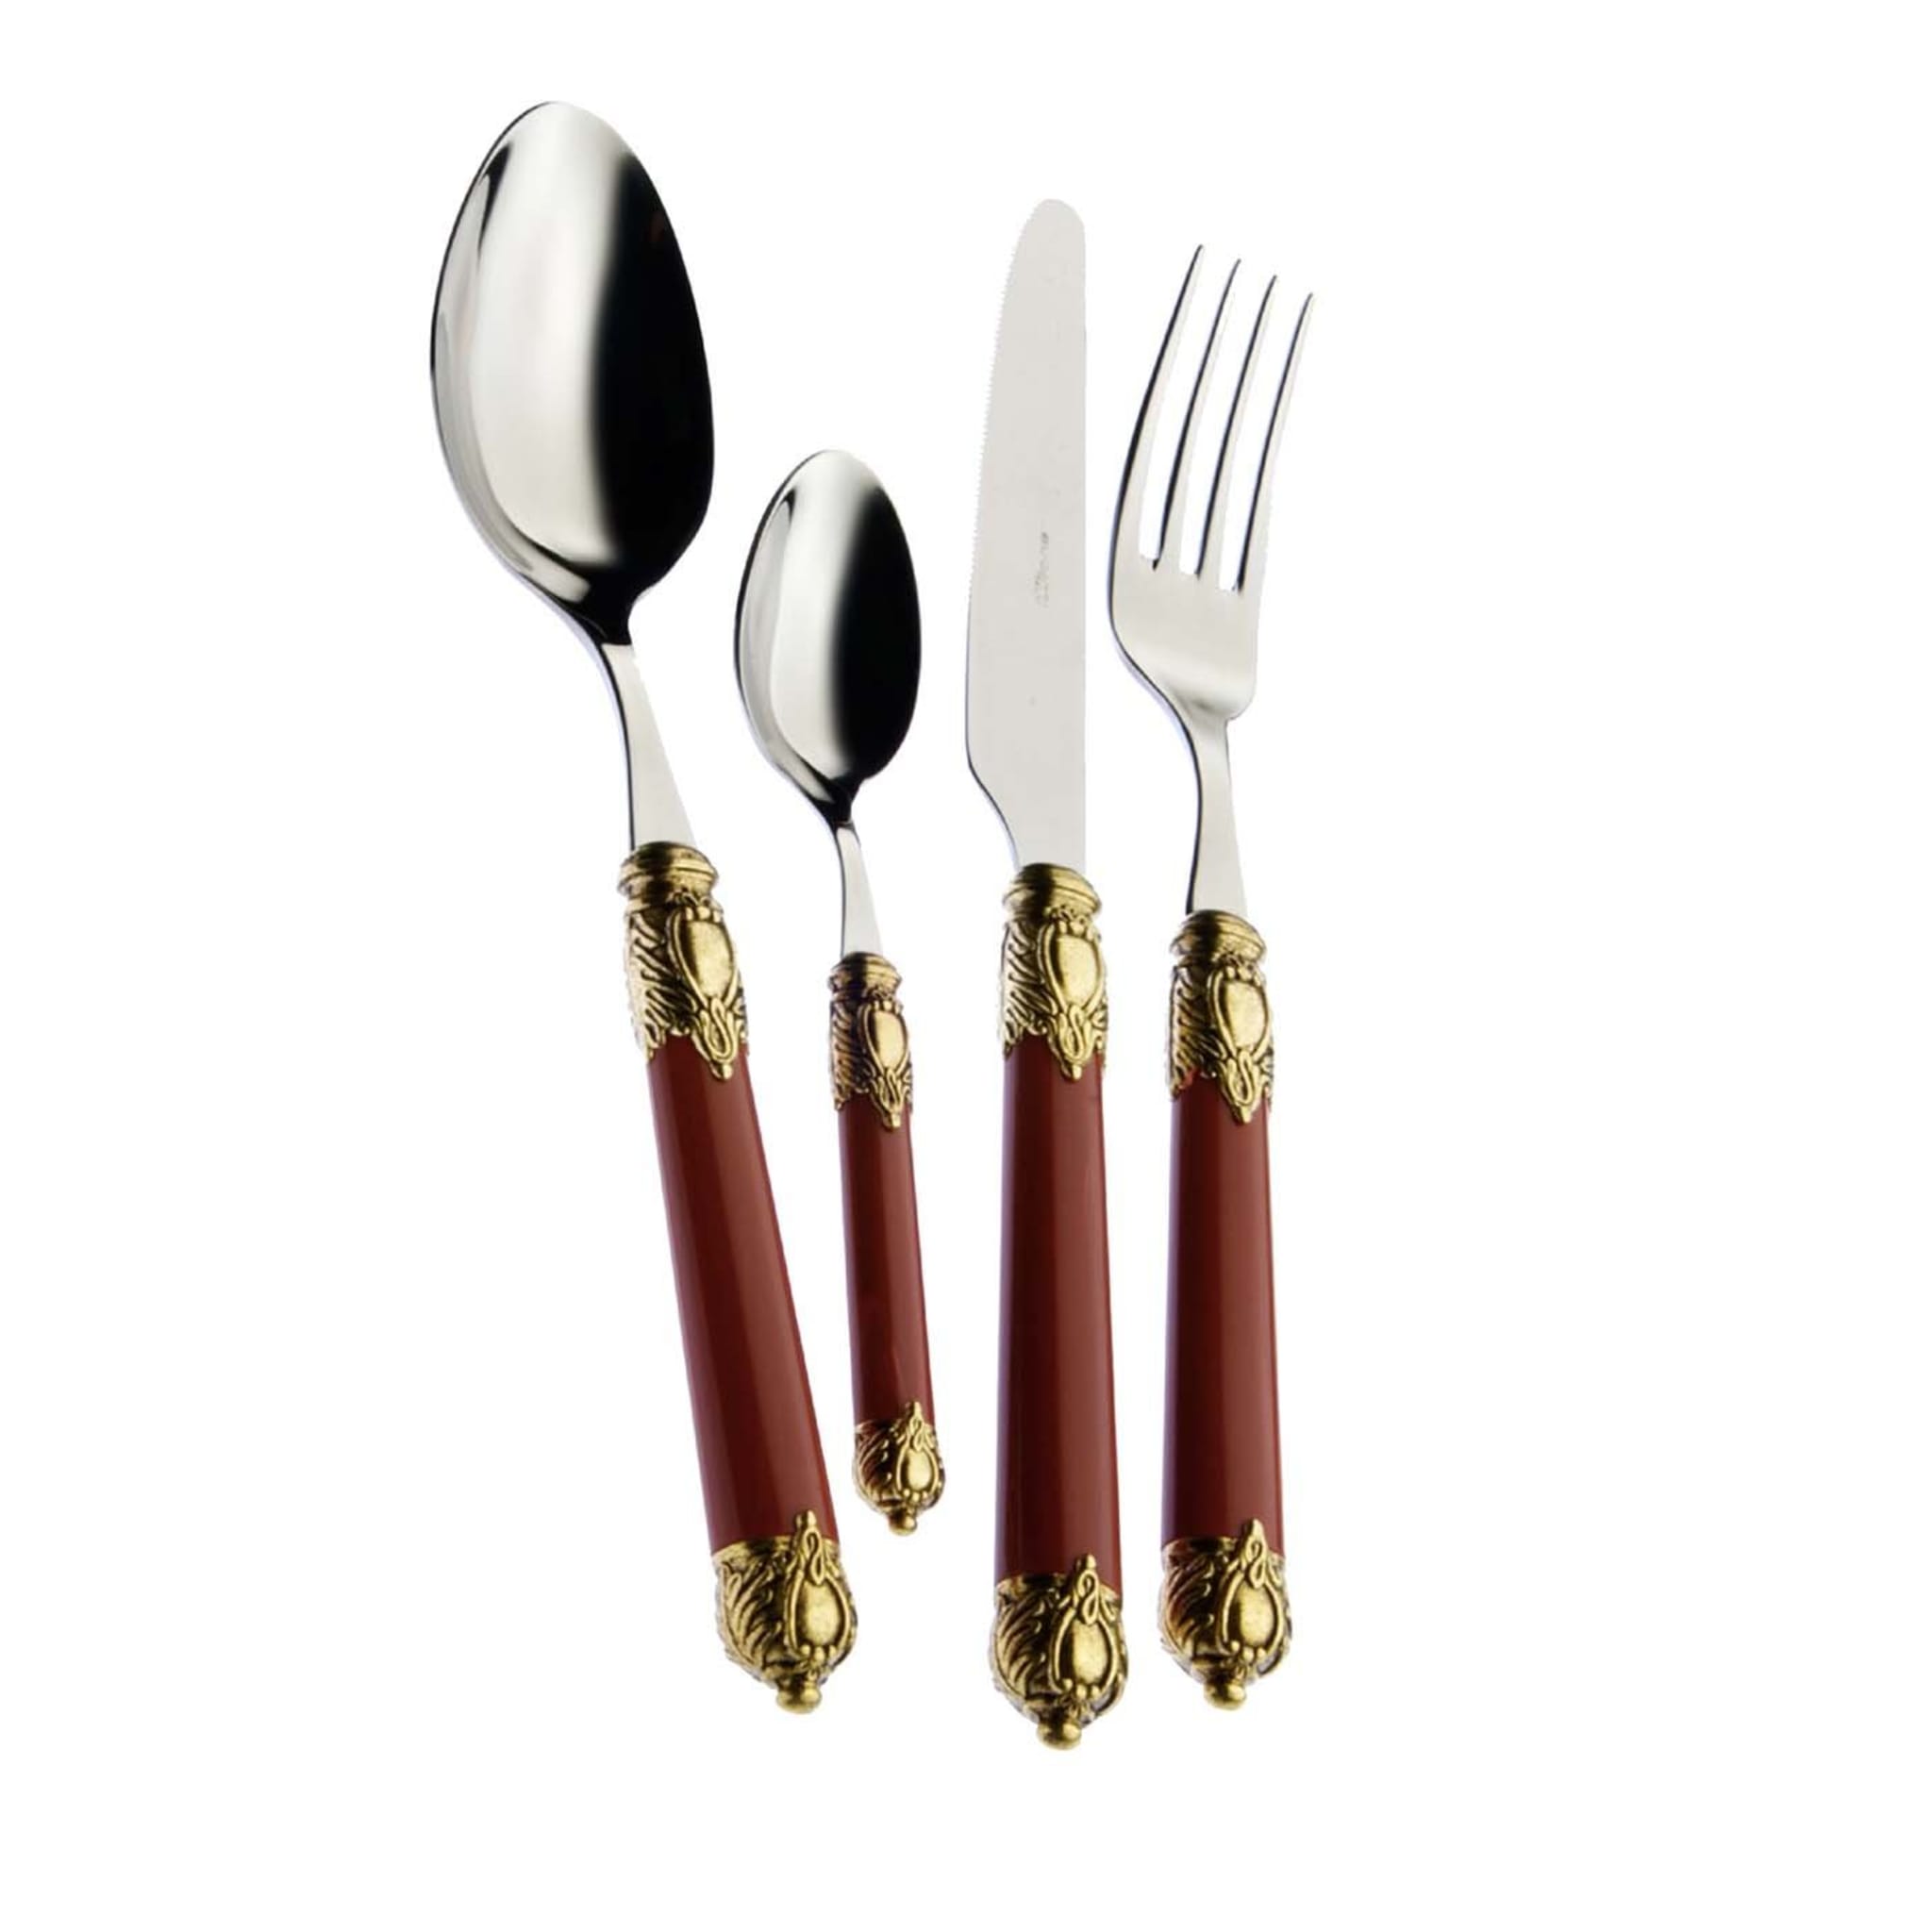 Rinascimento 24-Piece Cutlery Set in Burgundy with Box - Main view